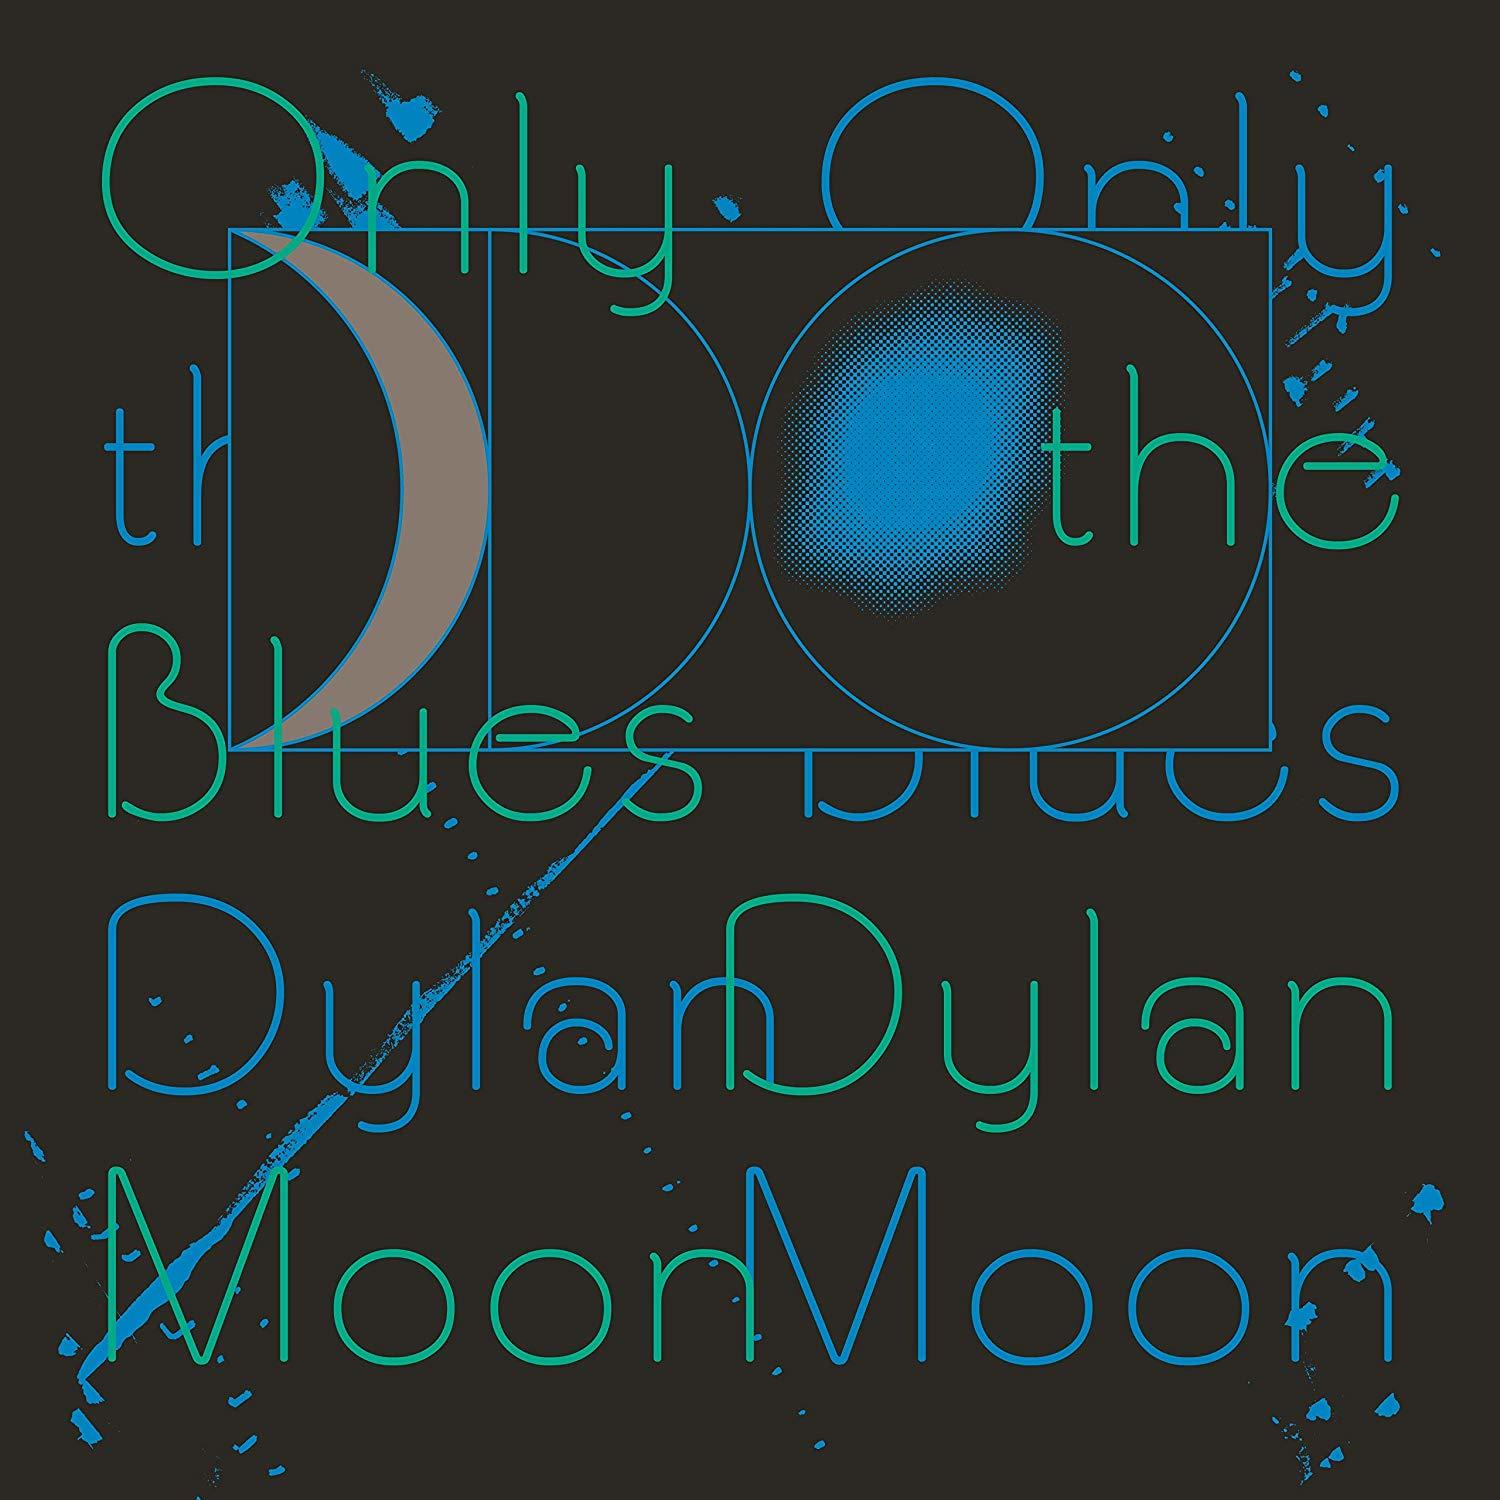 Blues - (Vinyl) - The Only Dylan Moon